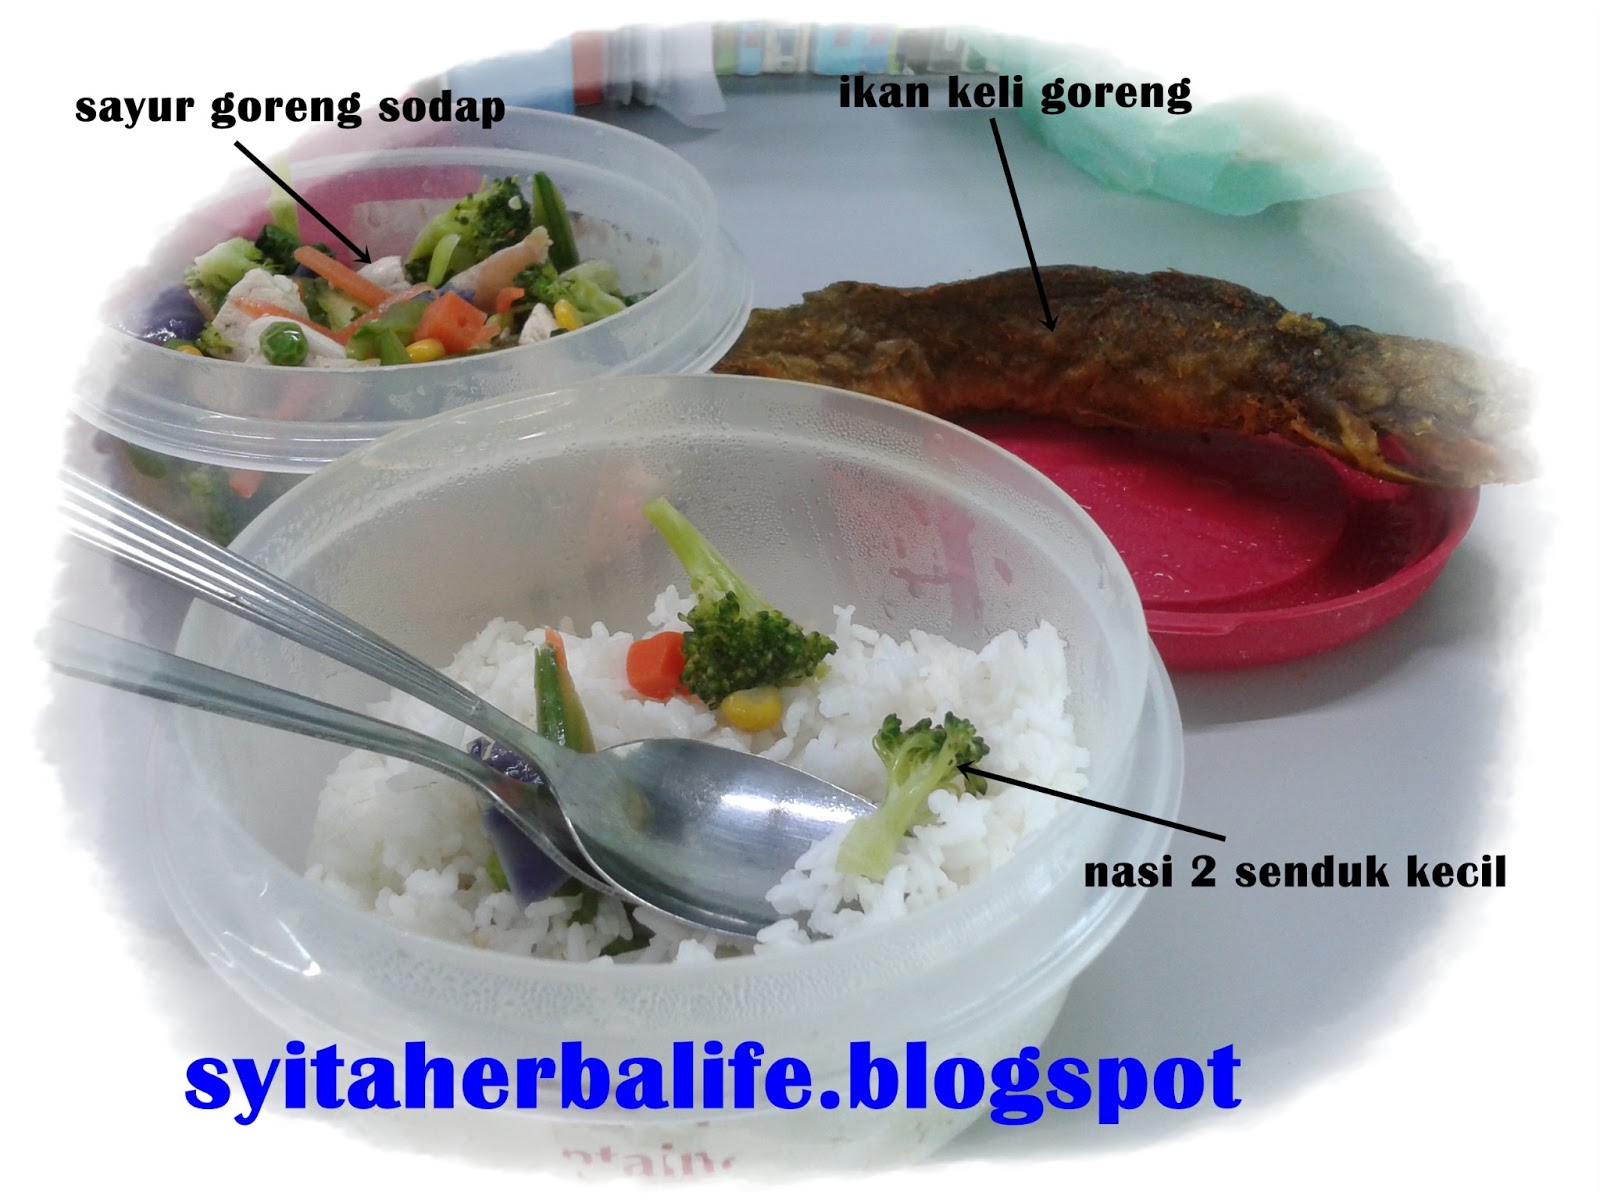 Sharing an experience: resepi diet sihat